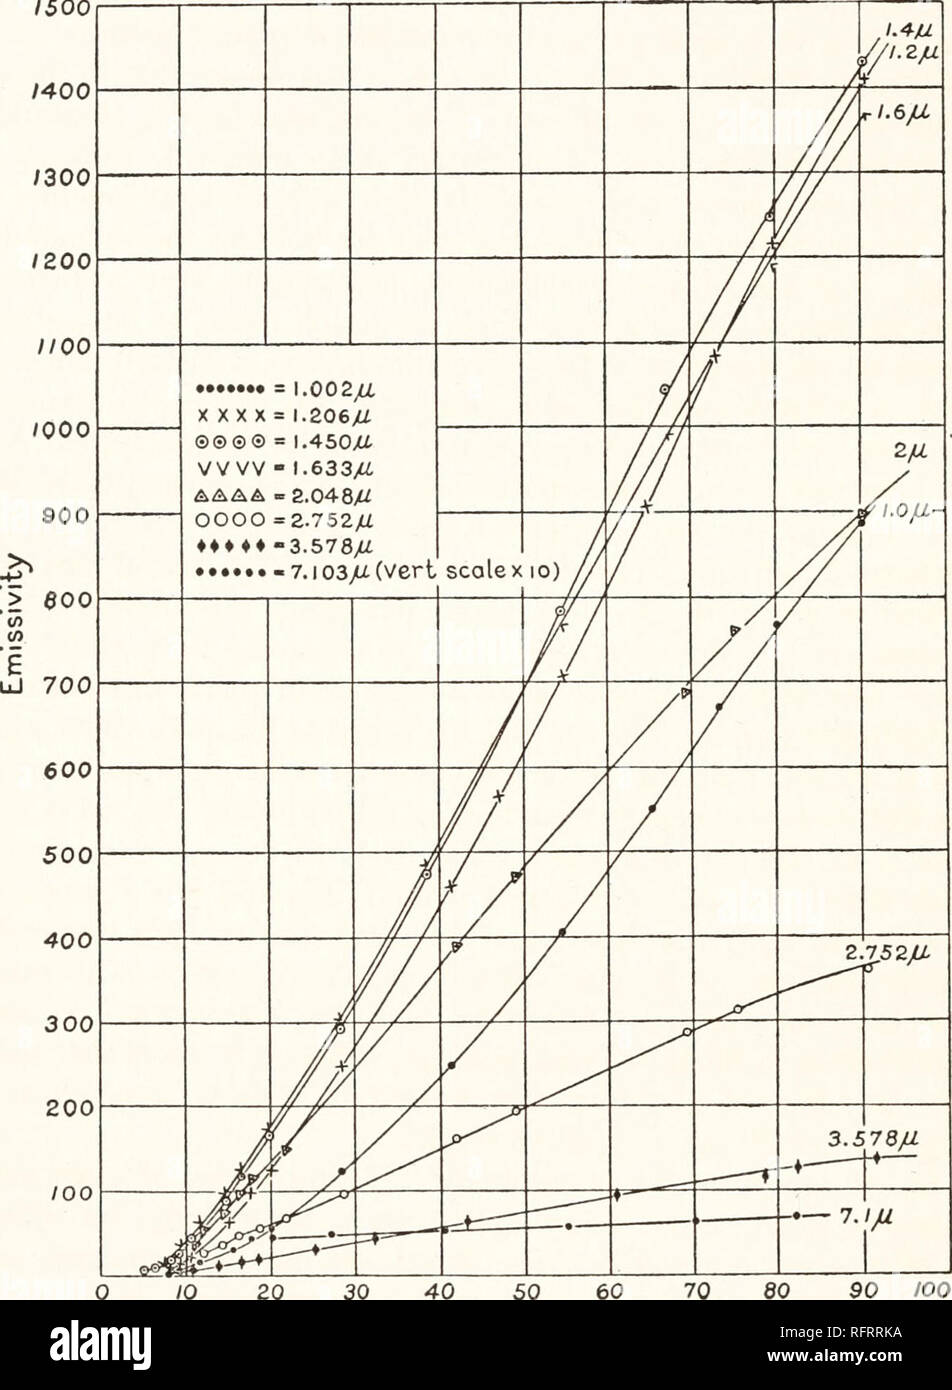 . Carnegie Institution of Washington publication. 126 INFRA-RED EMISSION SPECTRA. The voltage was obtained with a multiple-cell electrostatic voltmeter. The curves for the intensest part of the spectrum pass through a double cur- vature and have the general outline of that of platinum. The normal burning is 80 watts and above that point the isochromatics appear to cm 1500 1400. 10 20 30 40 50 60 70 80 90 100 Watts Fig. 95. — Isochromatic radiation curves of Nernst glower. show a slight increase in curvature. The intersection of the graphs for wave-lengths X= 1.206 [i and k = 1.633 P- at 73 wat Stock Photo